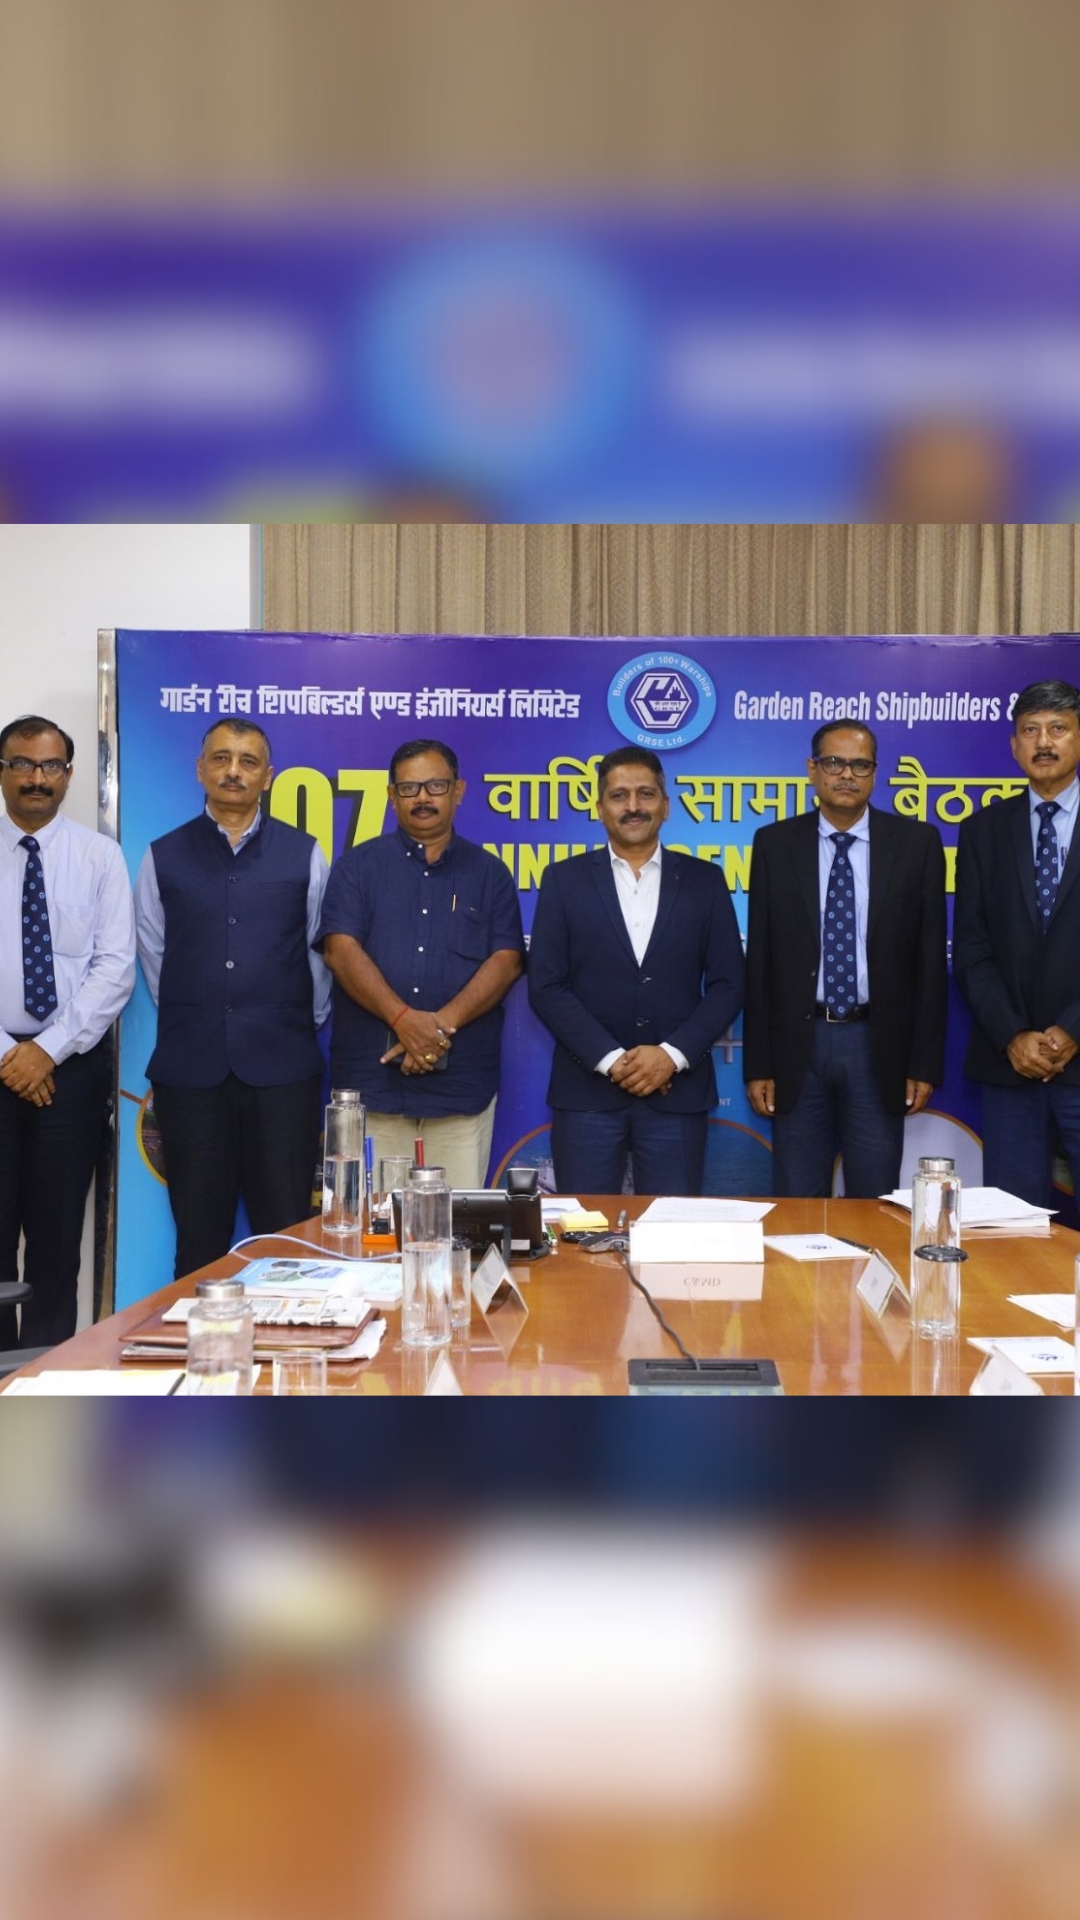 GRSE holds 107th Annual General Meeting; approves additional Dividend of Rs. 0.70

